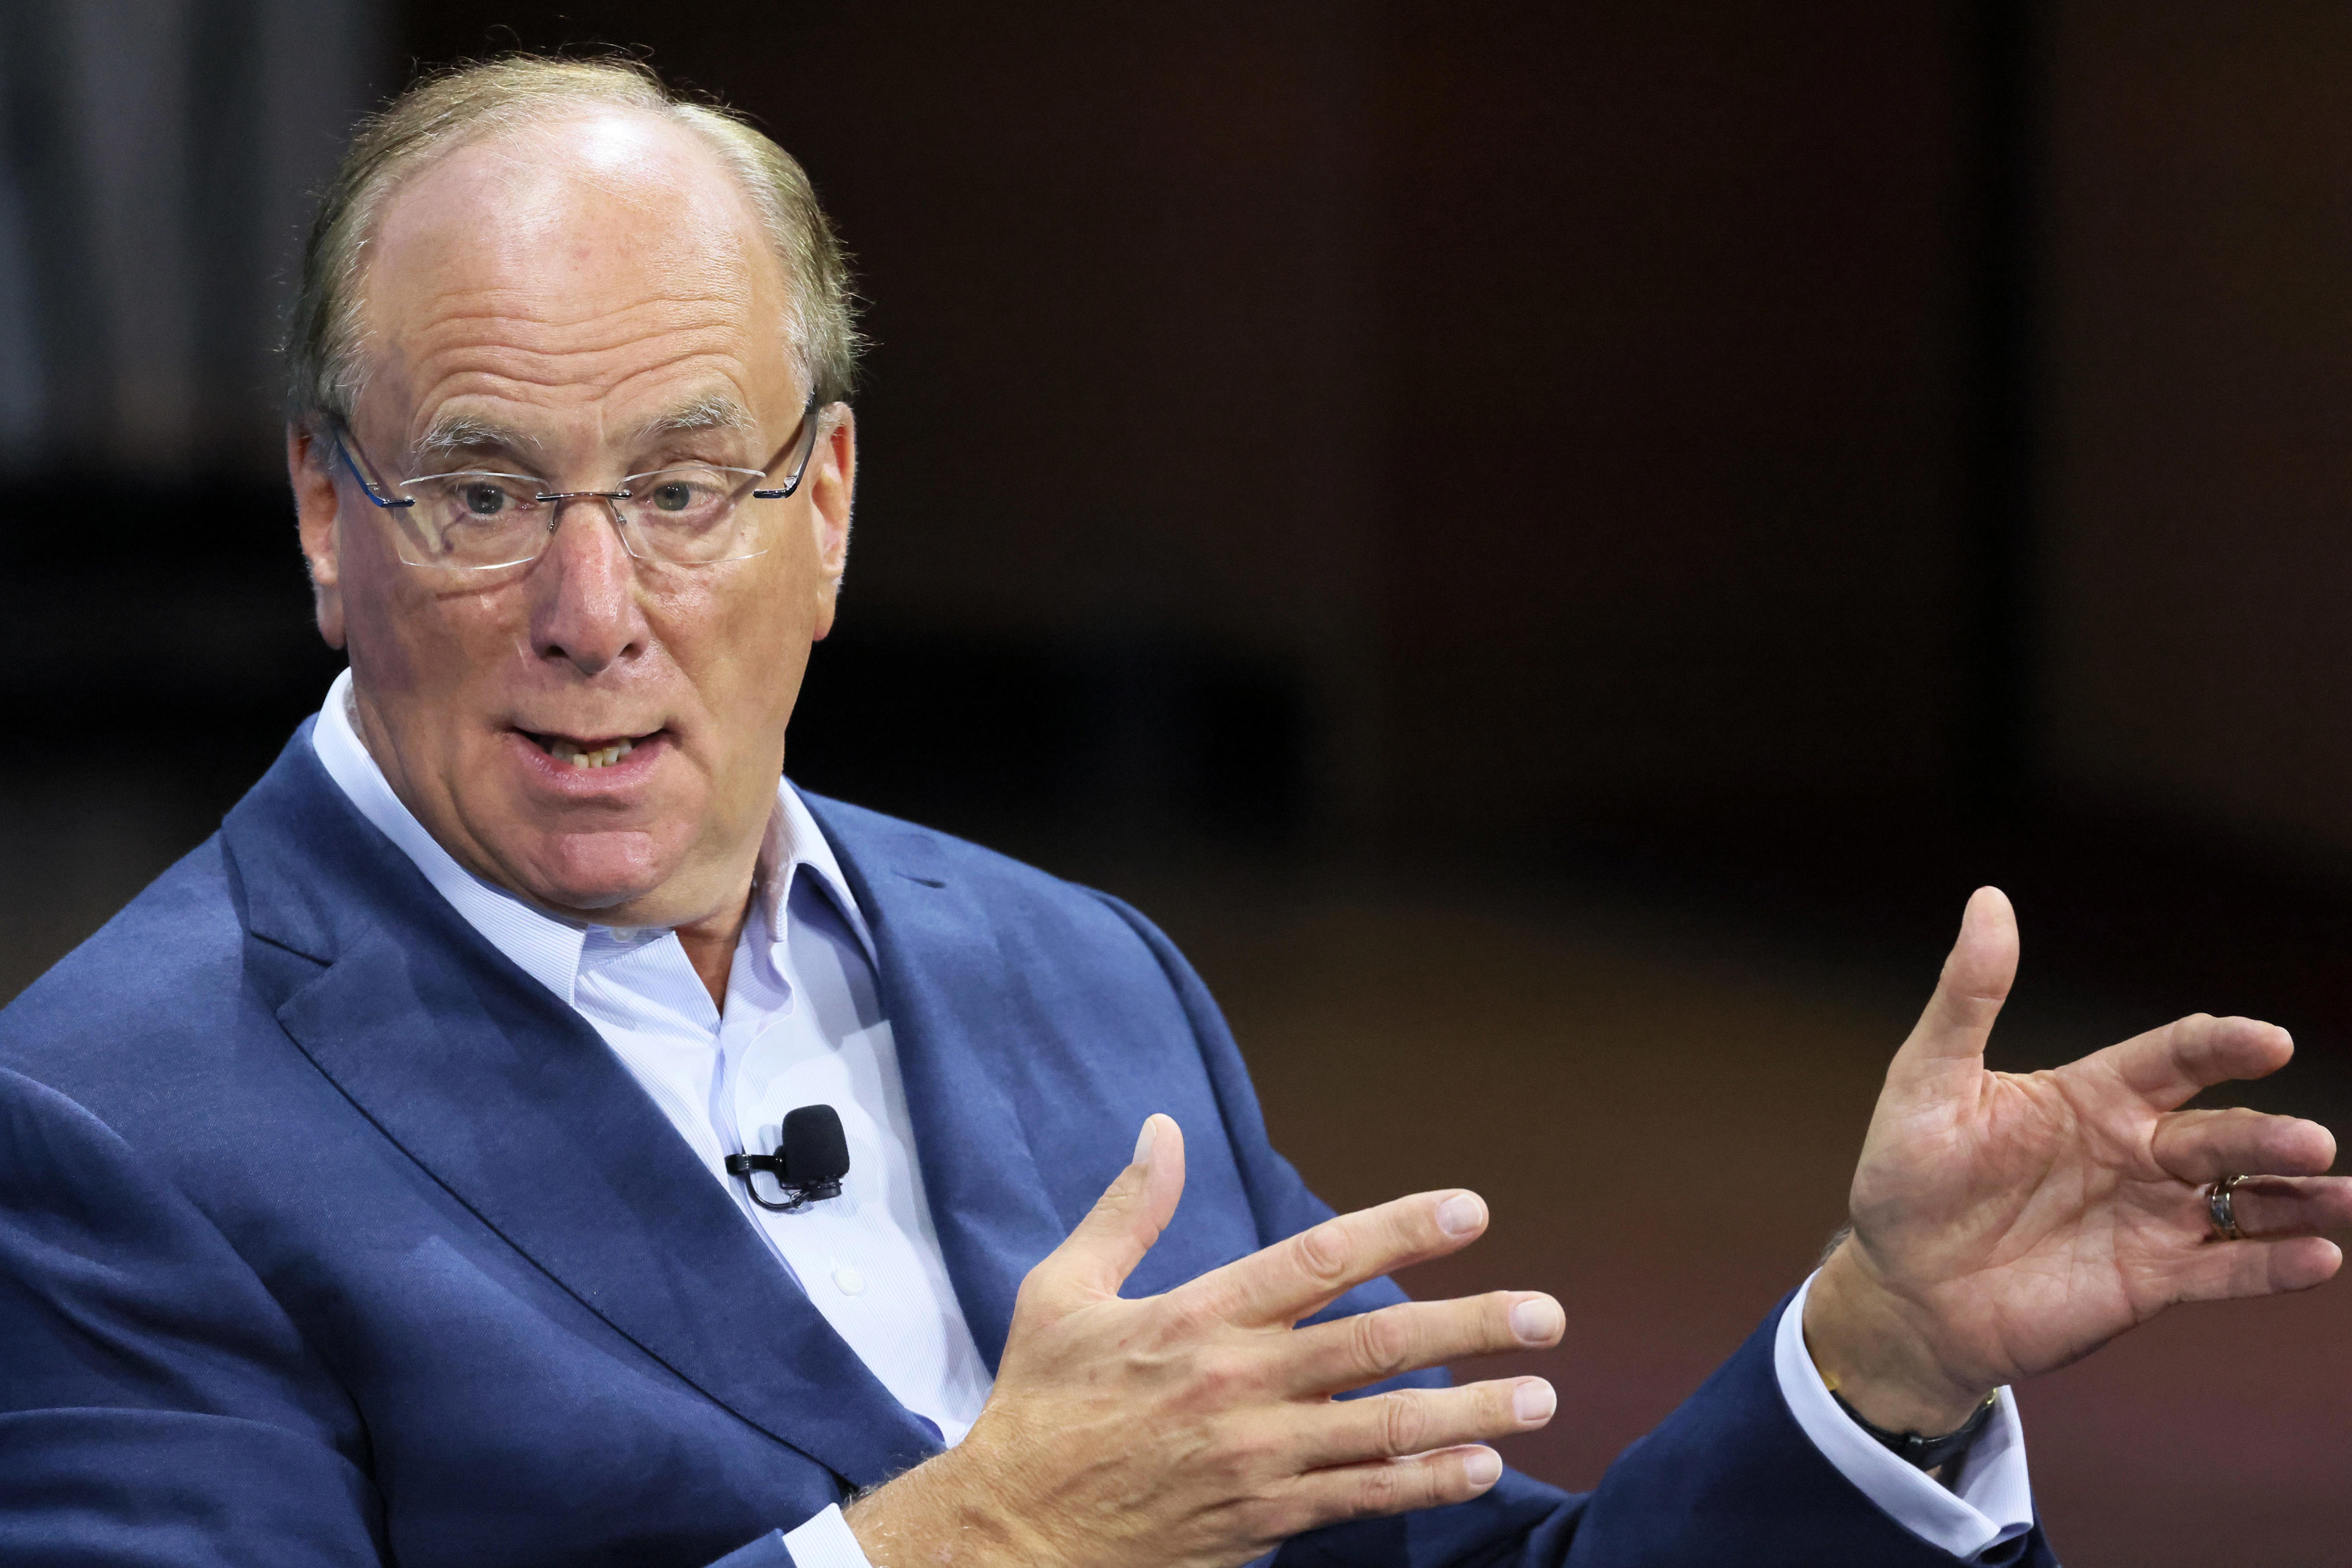 blackrock ceo said 'retirement crisis' needs to be addressed for younger generations losing hope